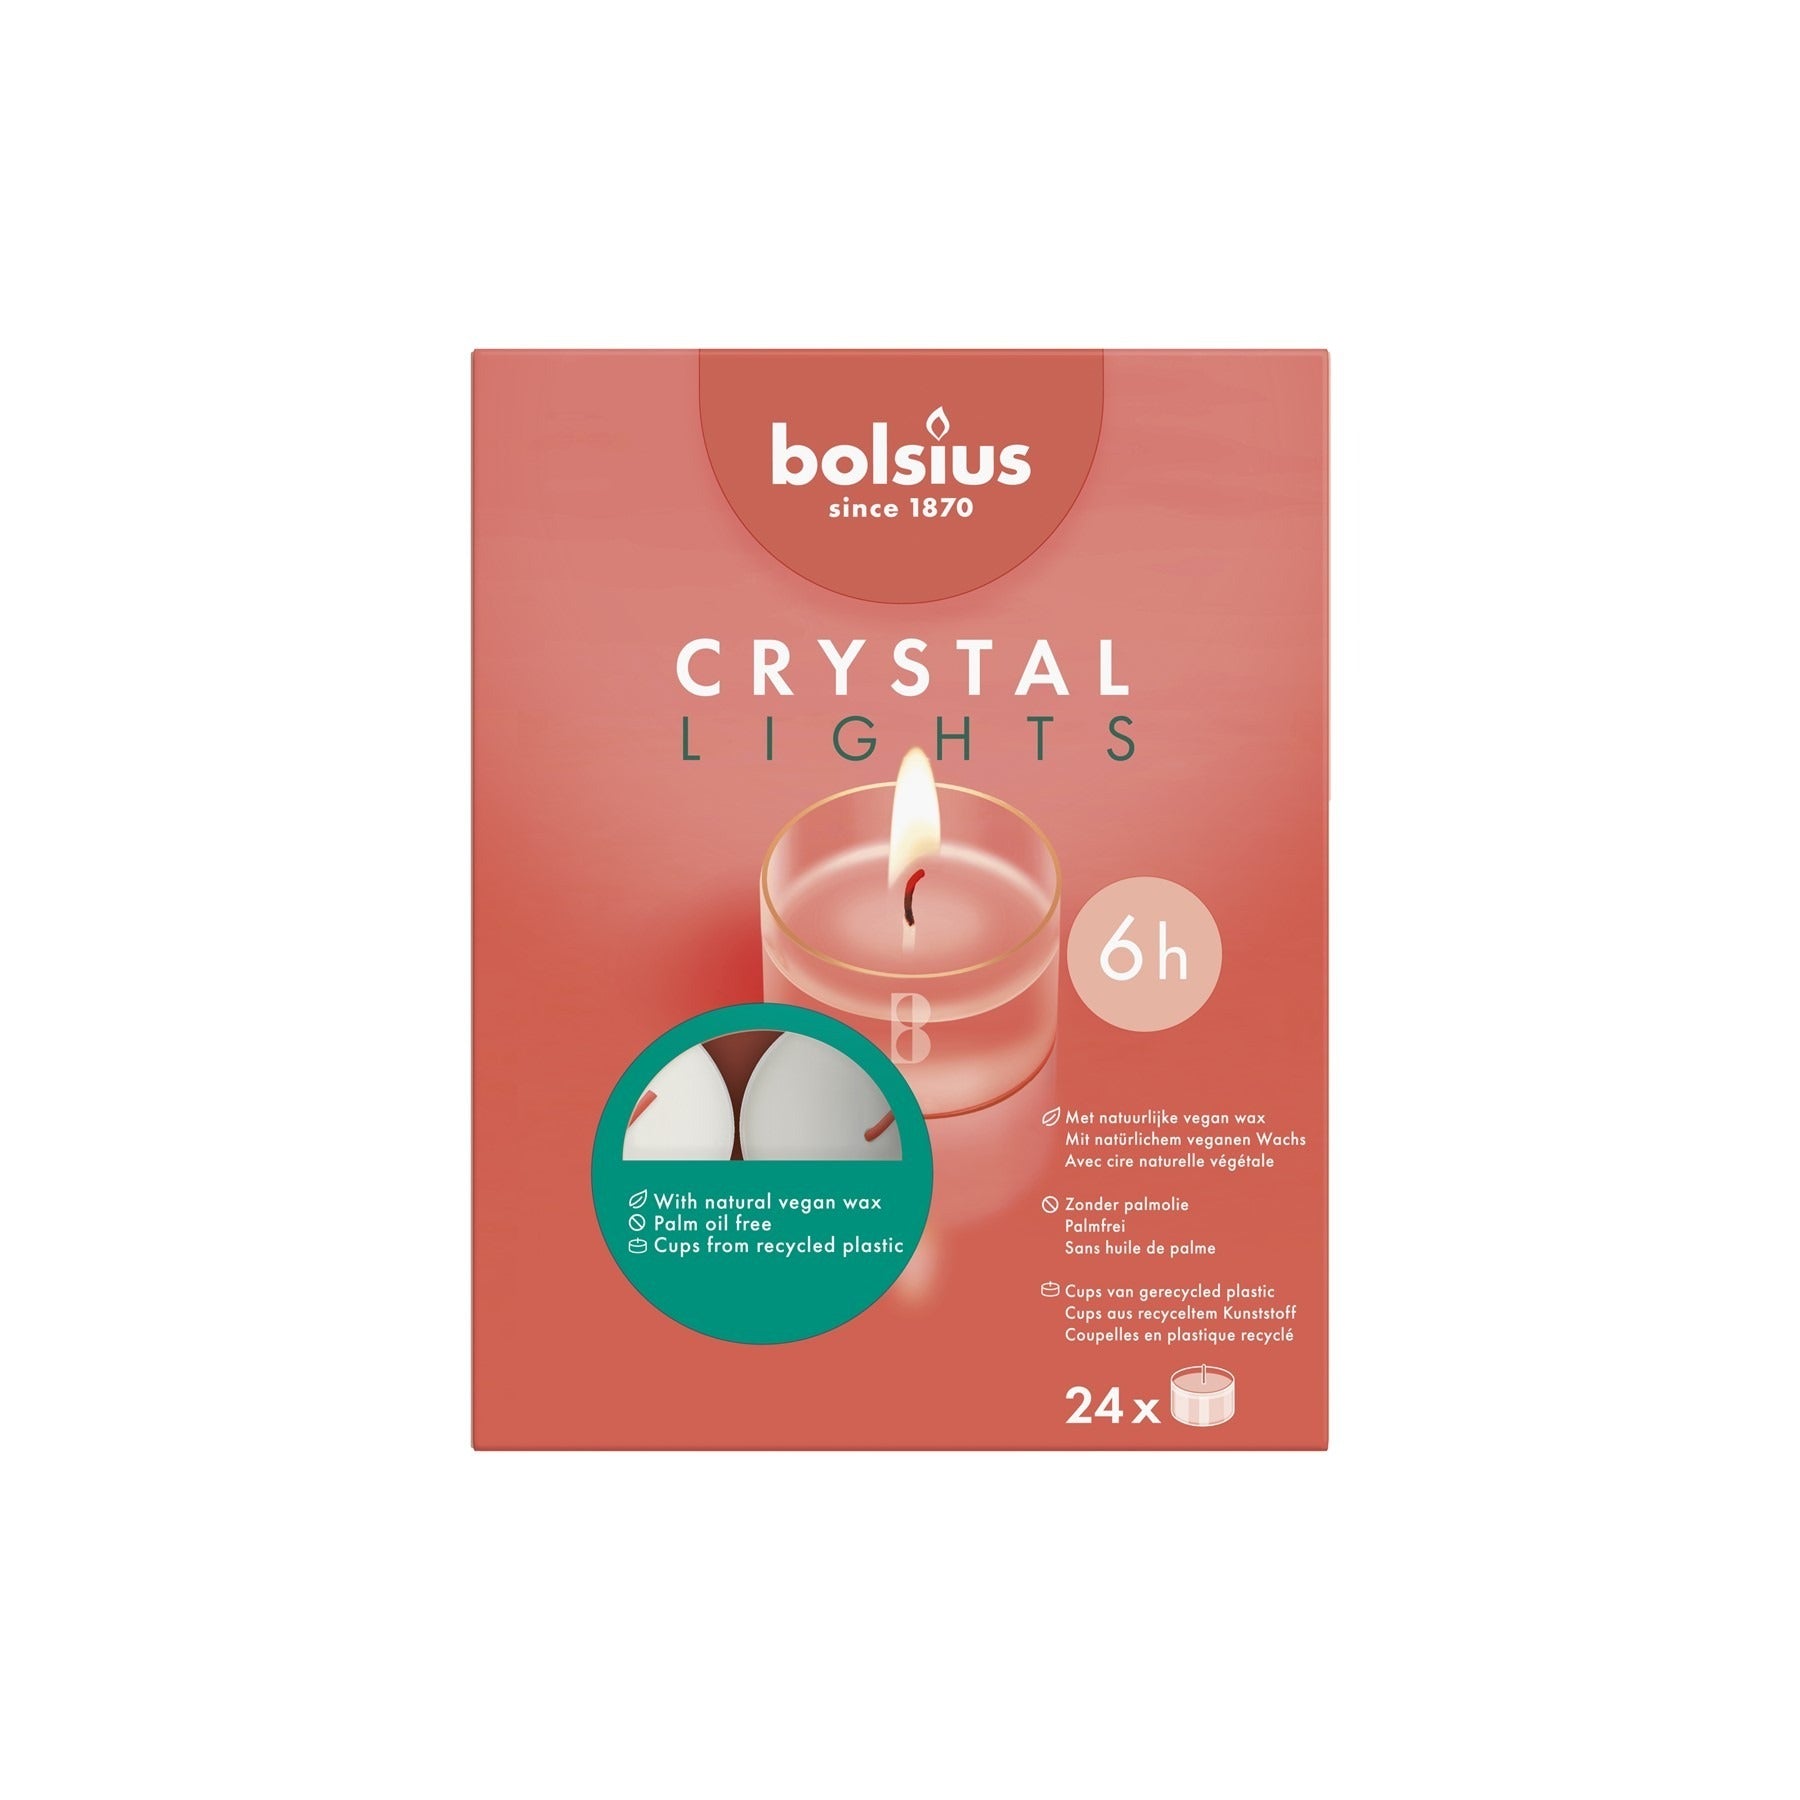 View Bolsius Crystal Clear Cup Maxi Tea Lights 8 hour burntime information